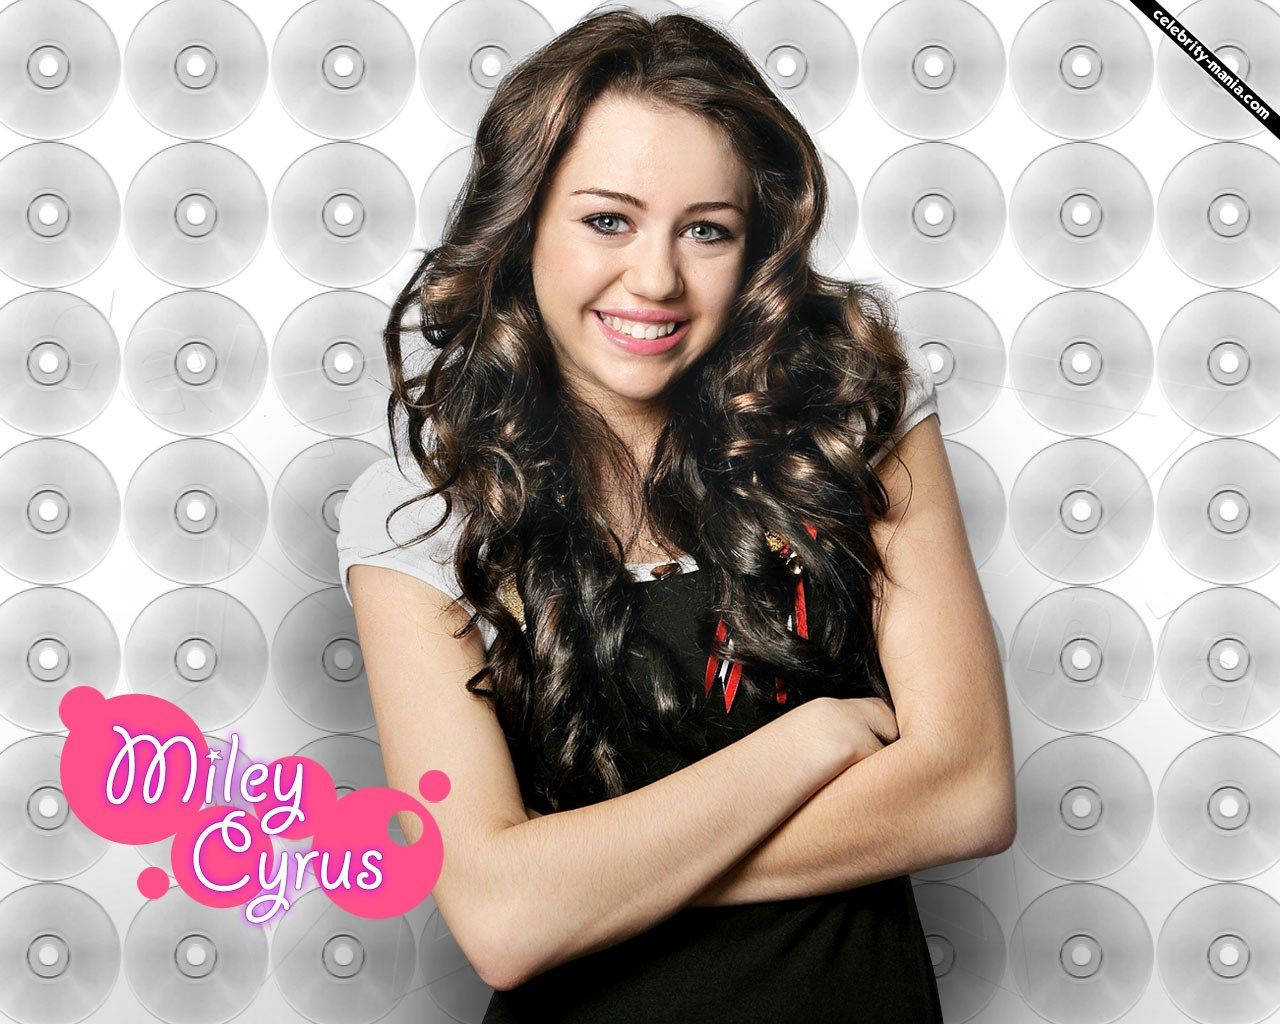 Miley Cyrus With Long Hair Smiling Background